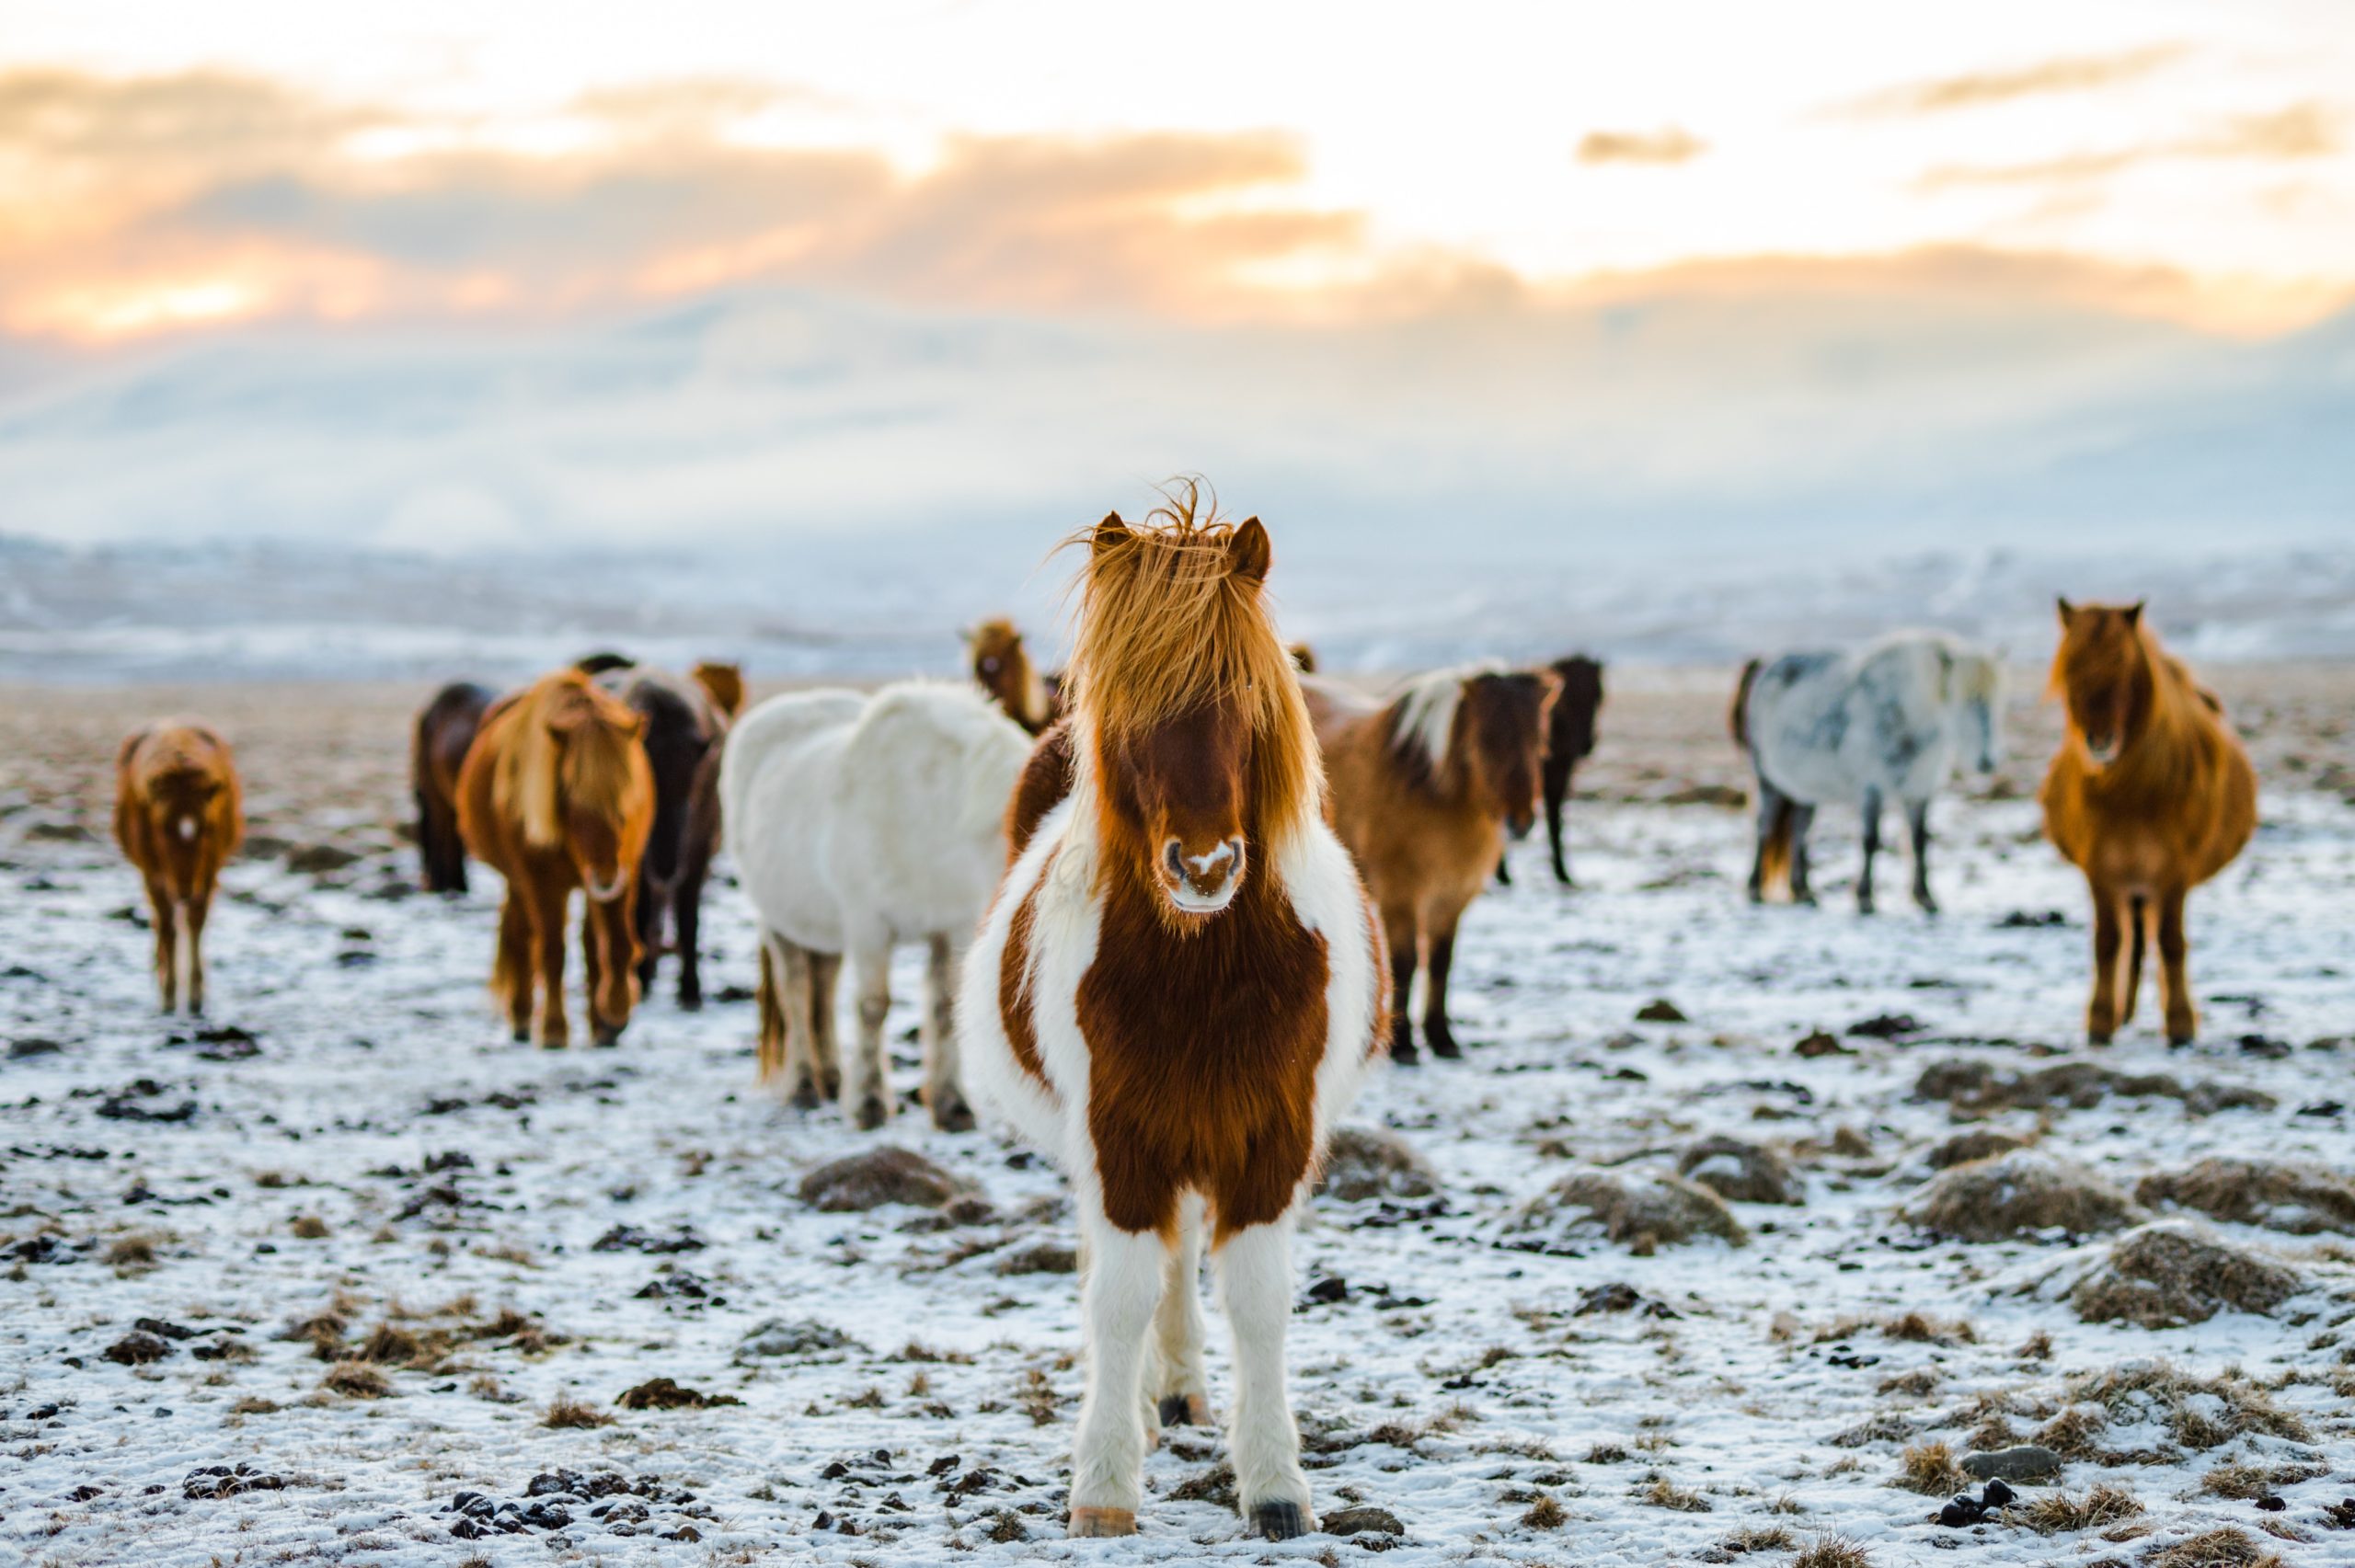 A herd of horses during winter.